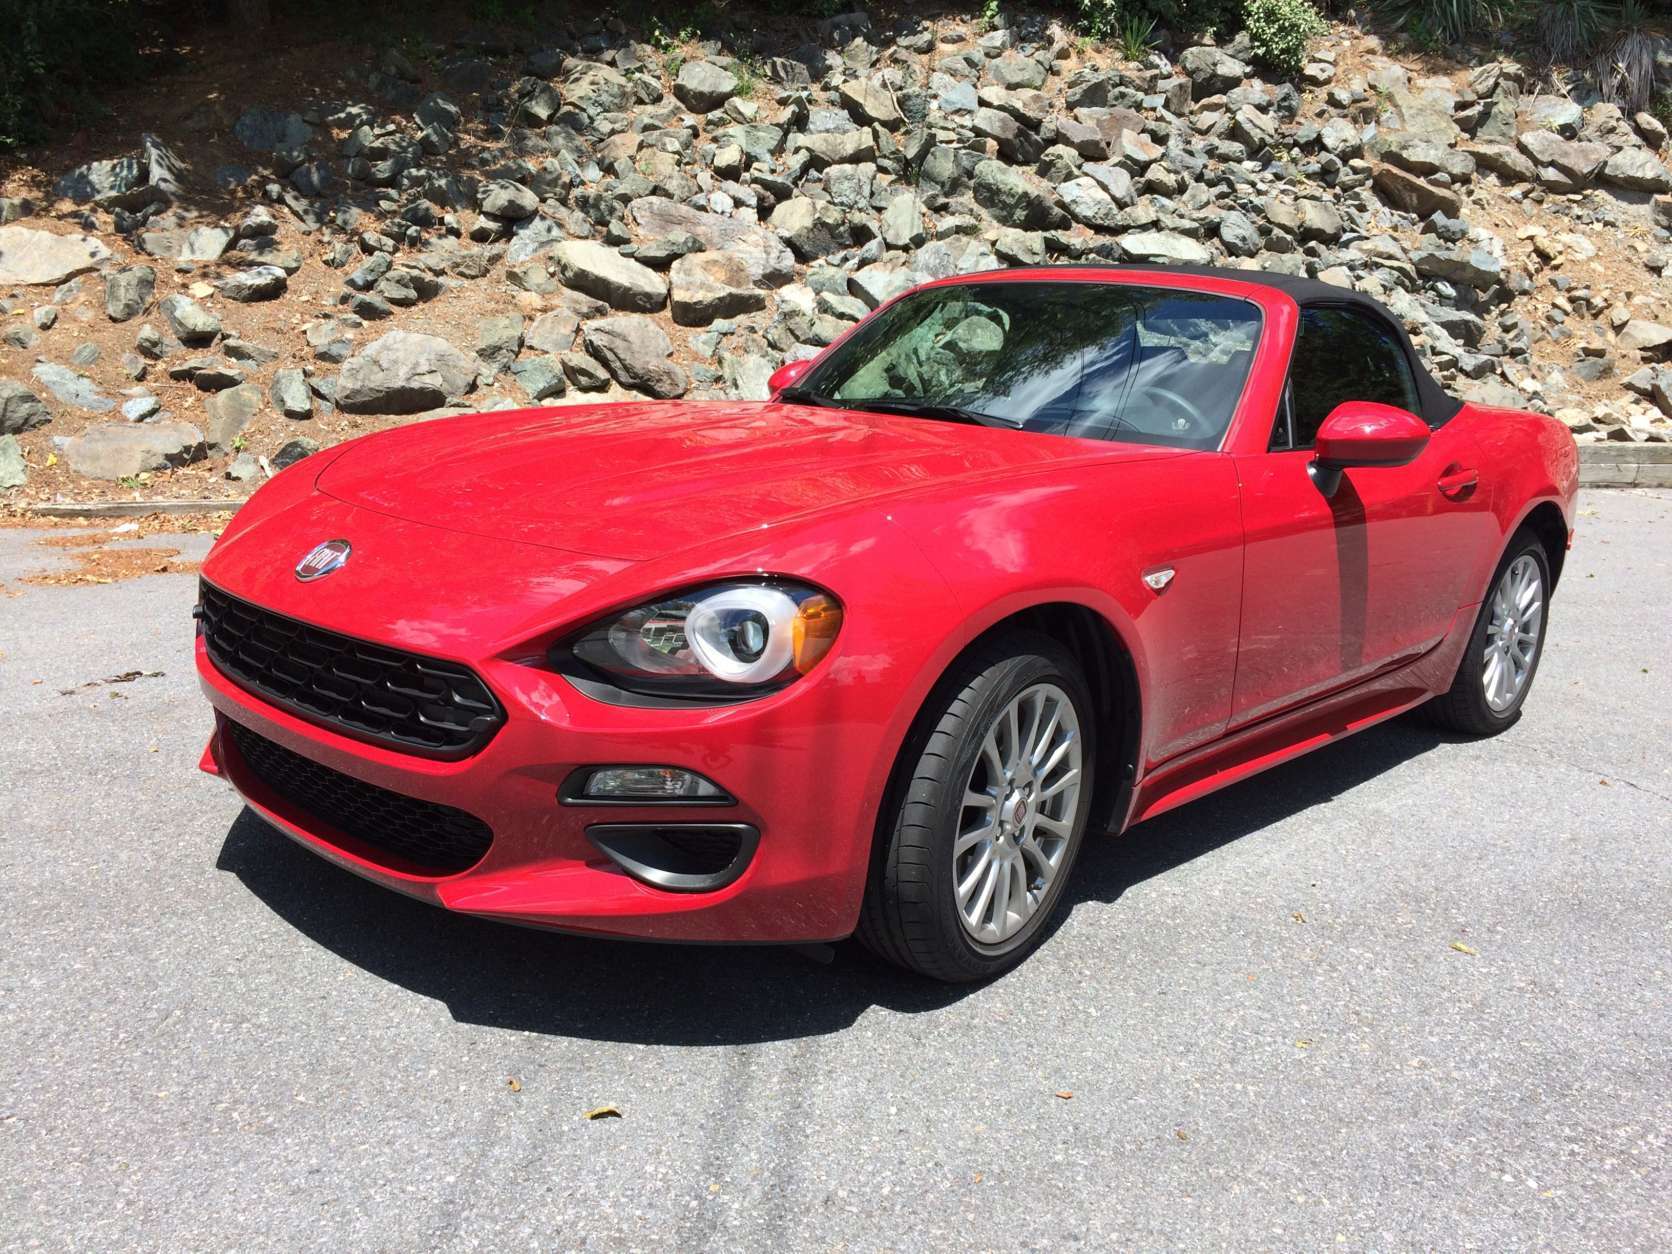 A fun Italian roadster is now available at a decent price with some of the same underpinnings of the popular Miata, but with its own look and personality, says Mike Parris. (WTOP/Mike Parris)